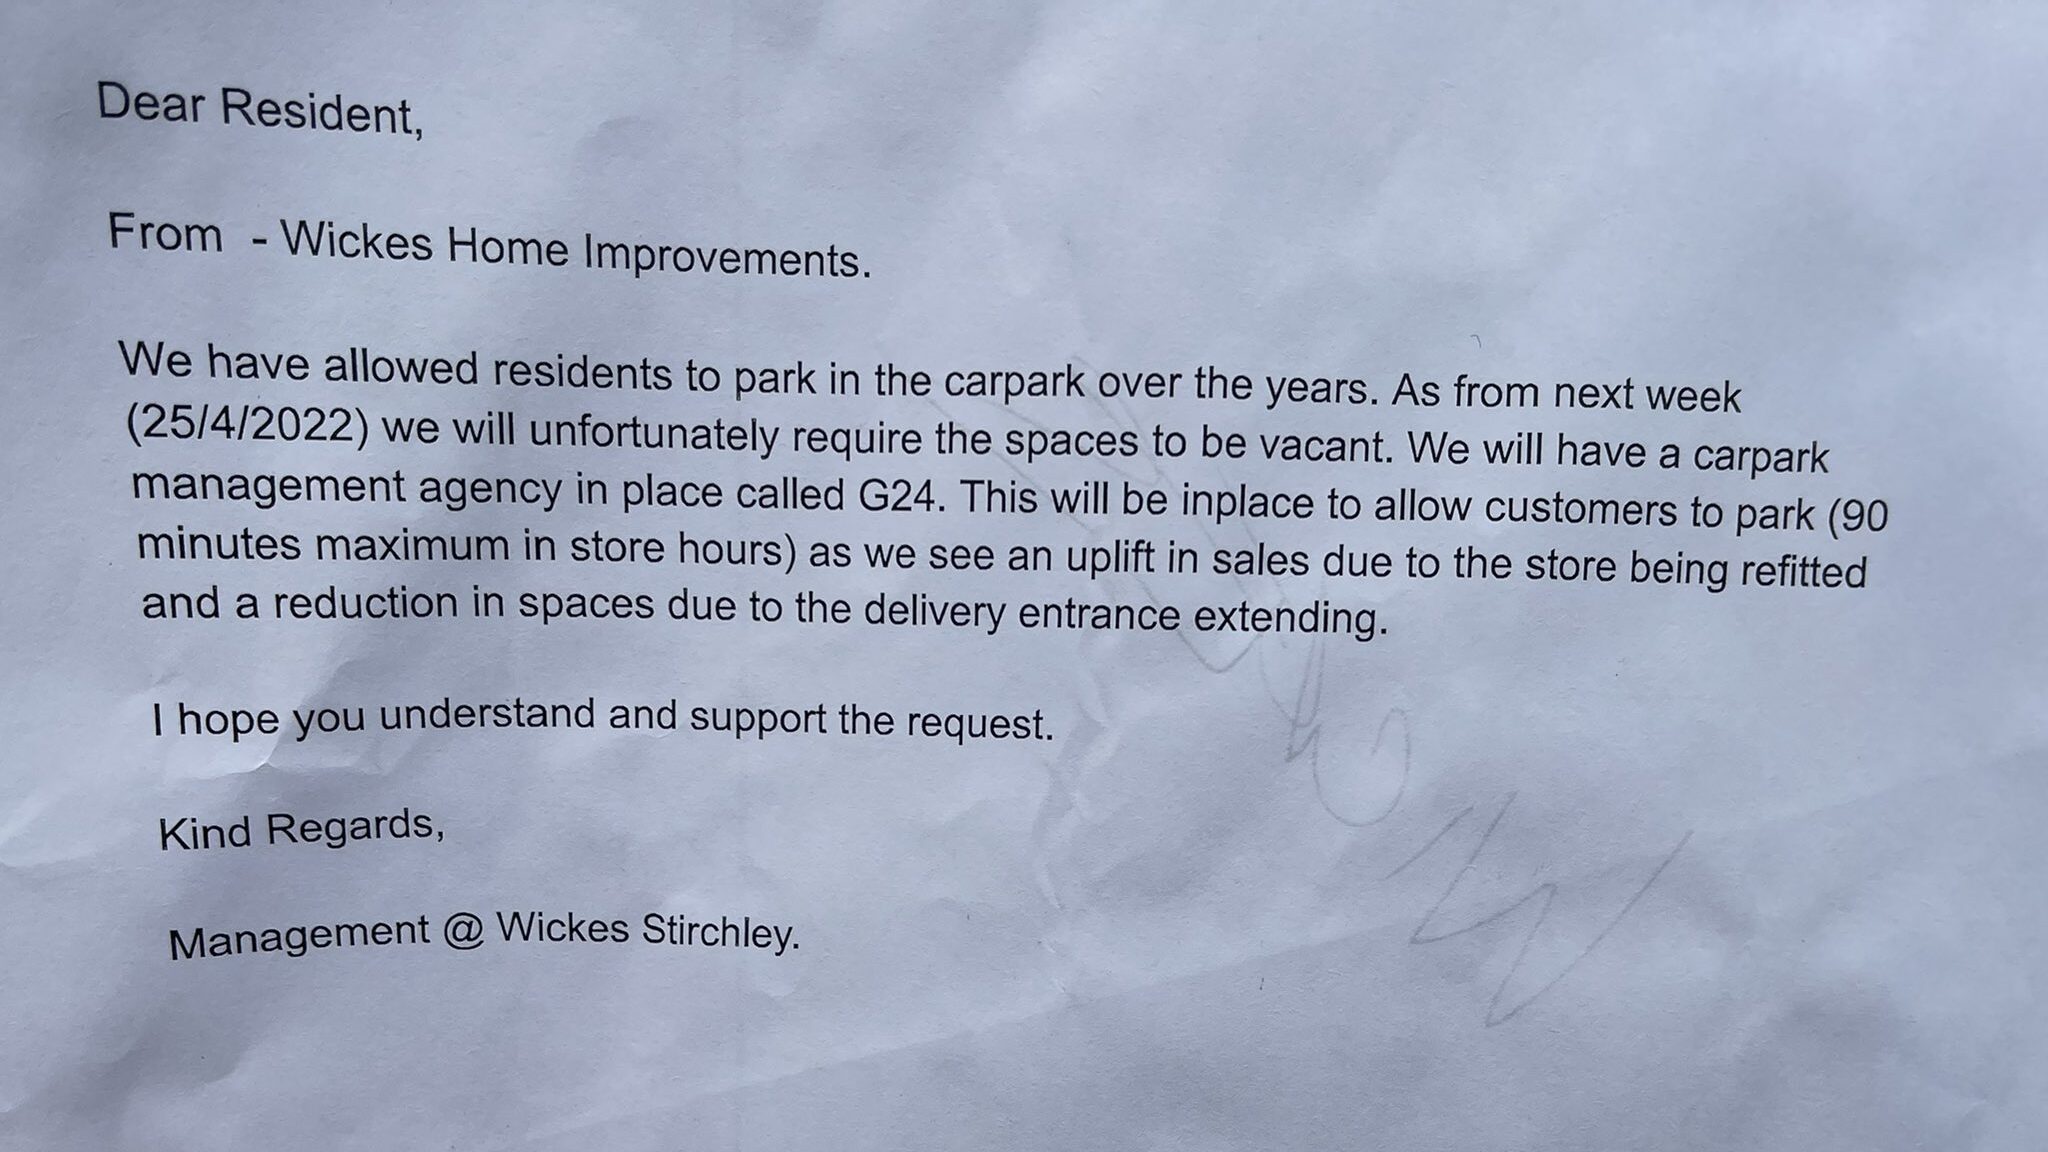 Photo of a letter reading; Dear Resident,From -Wickes Home Improvements.
We have allowed residents to park in the carpark over the years. As from next week
(25/4/2022) we will unfortunately require the spaces to be vacant. We will have a carpark
management agency in place called G24. This will be in place to allow customers to park (90
minutes maximum in store hours) as we see an uplift in sales due to the store being refitted
and a reduction in spaces due to the delivery entrance extending.
I hope you understand and support the request.
Kind Regards, Management @ Wickes Stirchley.